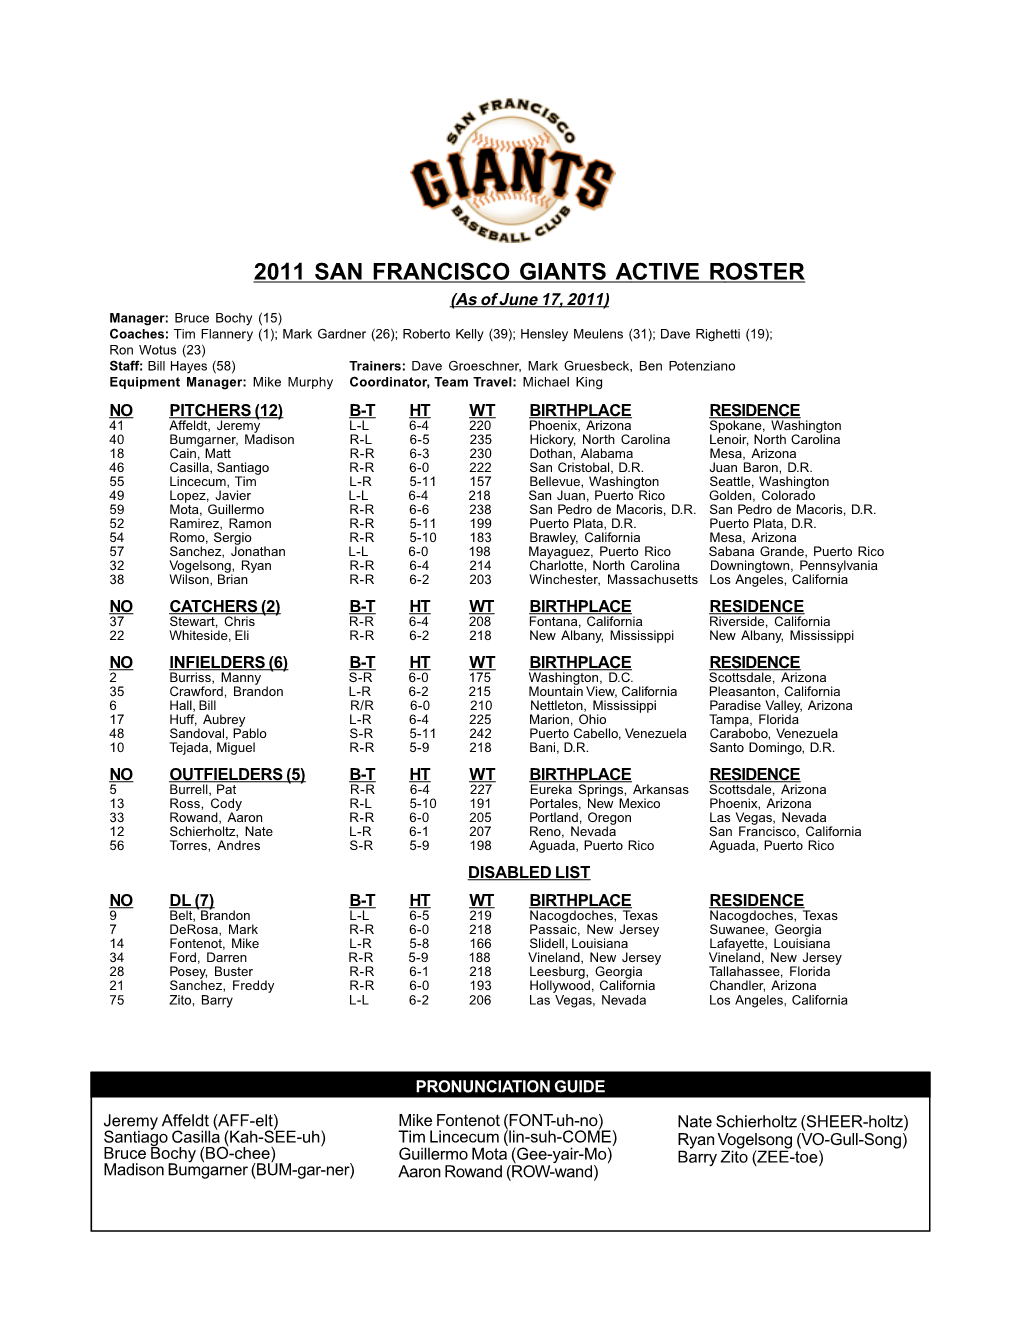 06-17-2011 Giants Roster